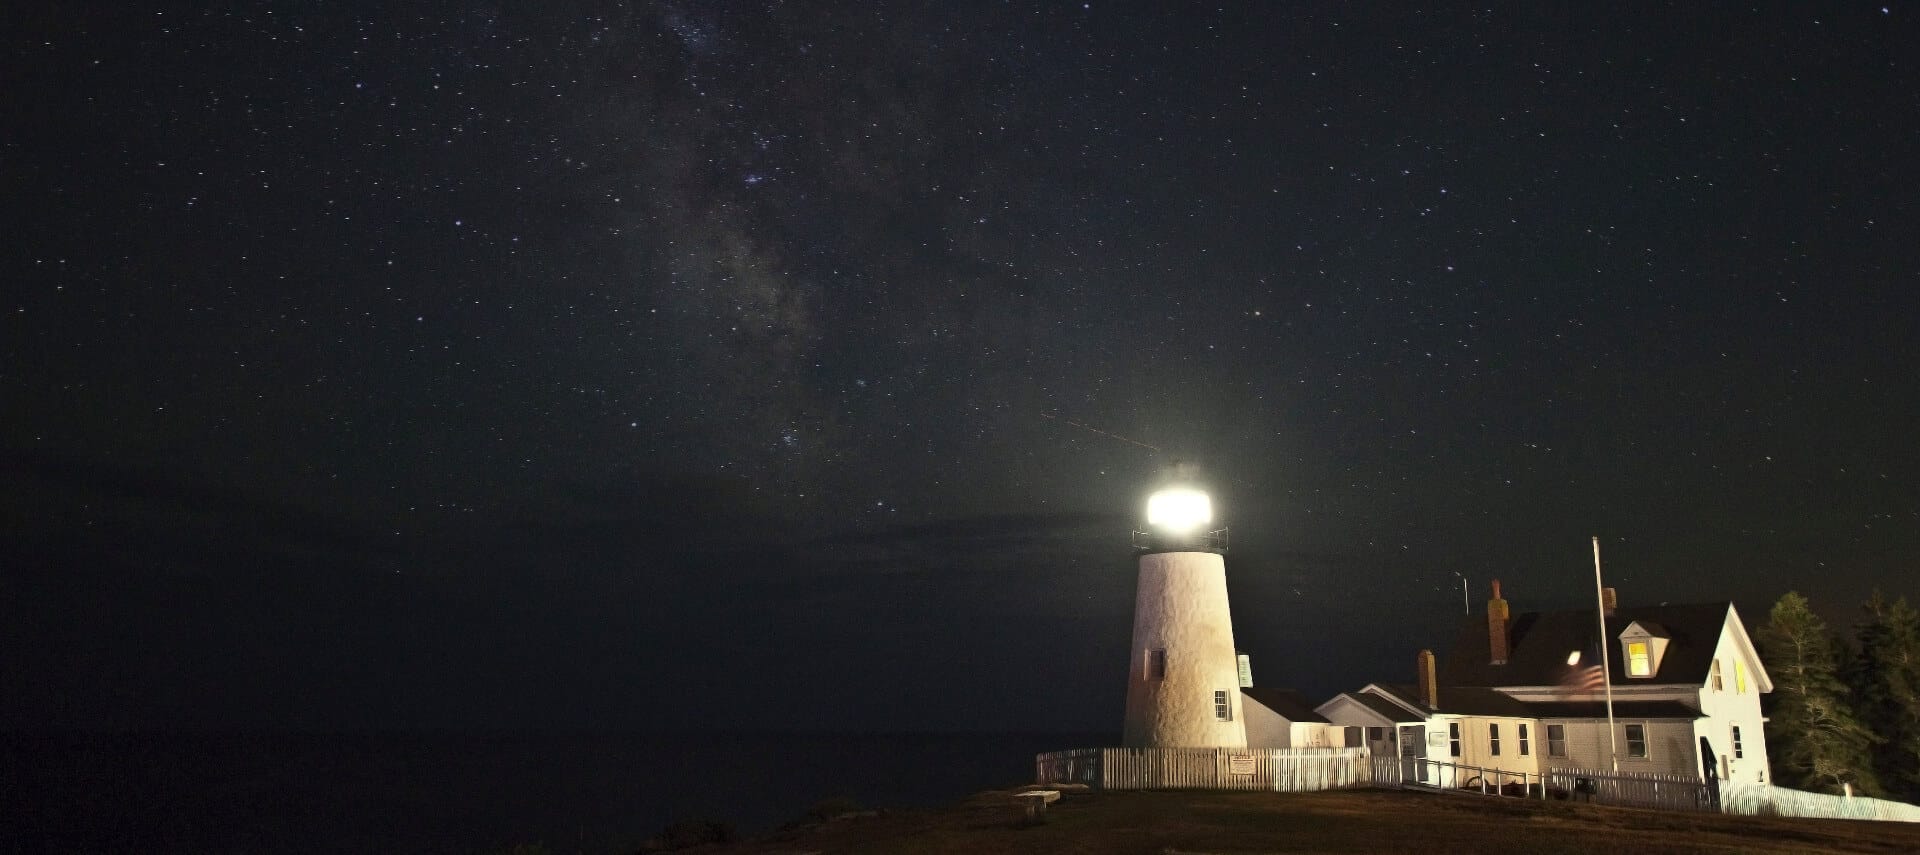 A lighthouse is lit up in the dark of night, surrounded by stars and the Milky Way.